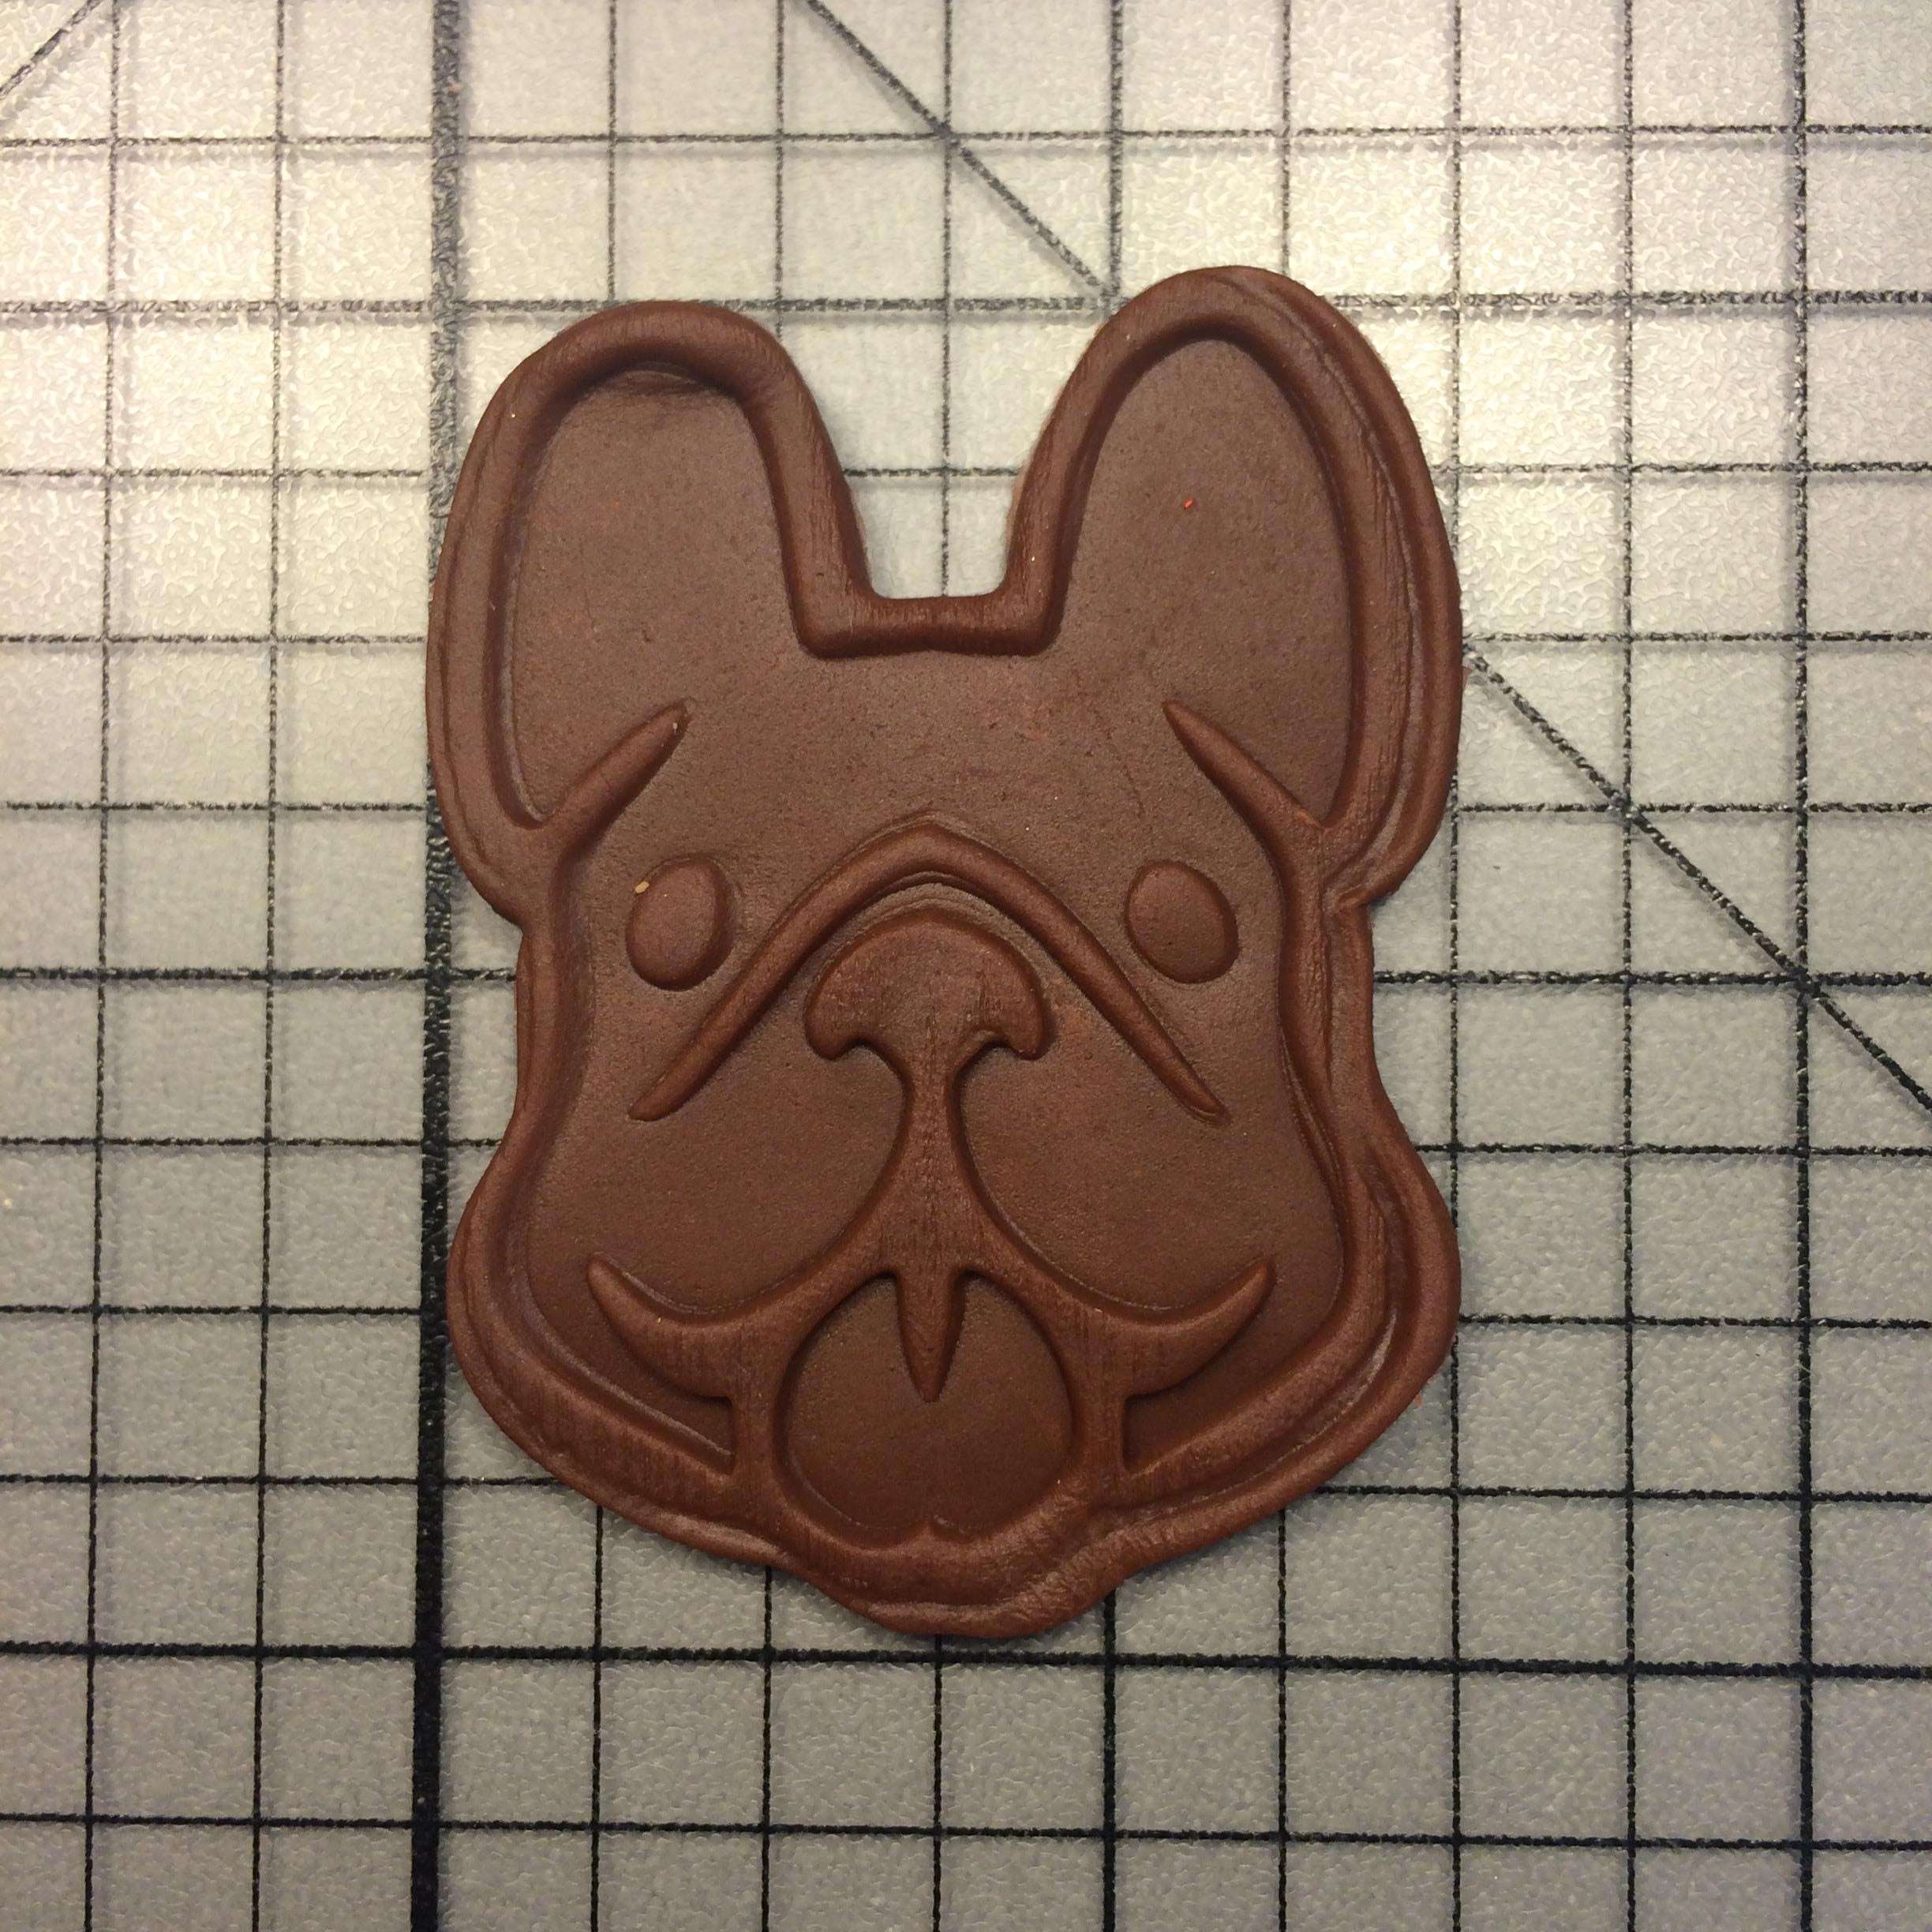 French Bulldog cookie cutter frenchie cookie cutter